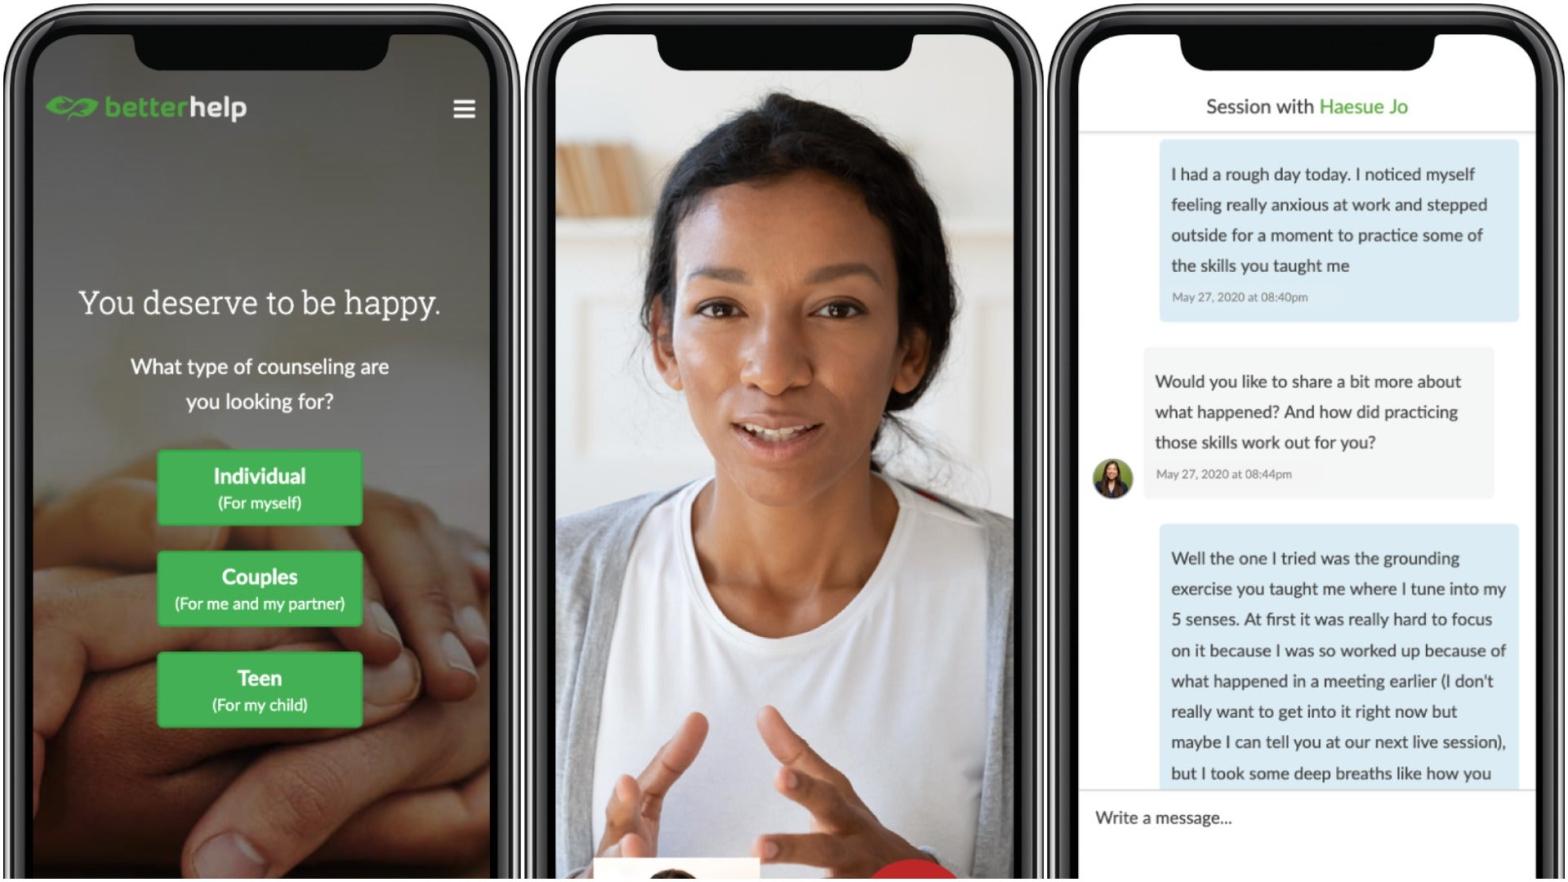 BetterHelp allows users to connect with a therapist online, but the app has a less than stellar track record. (Image: BetterHelp)